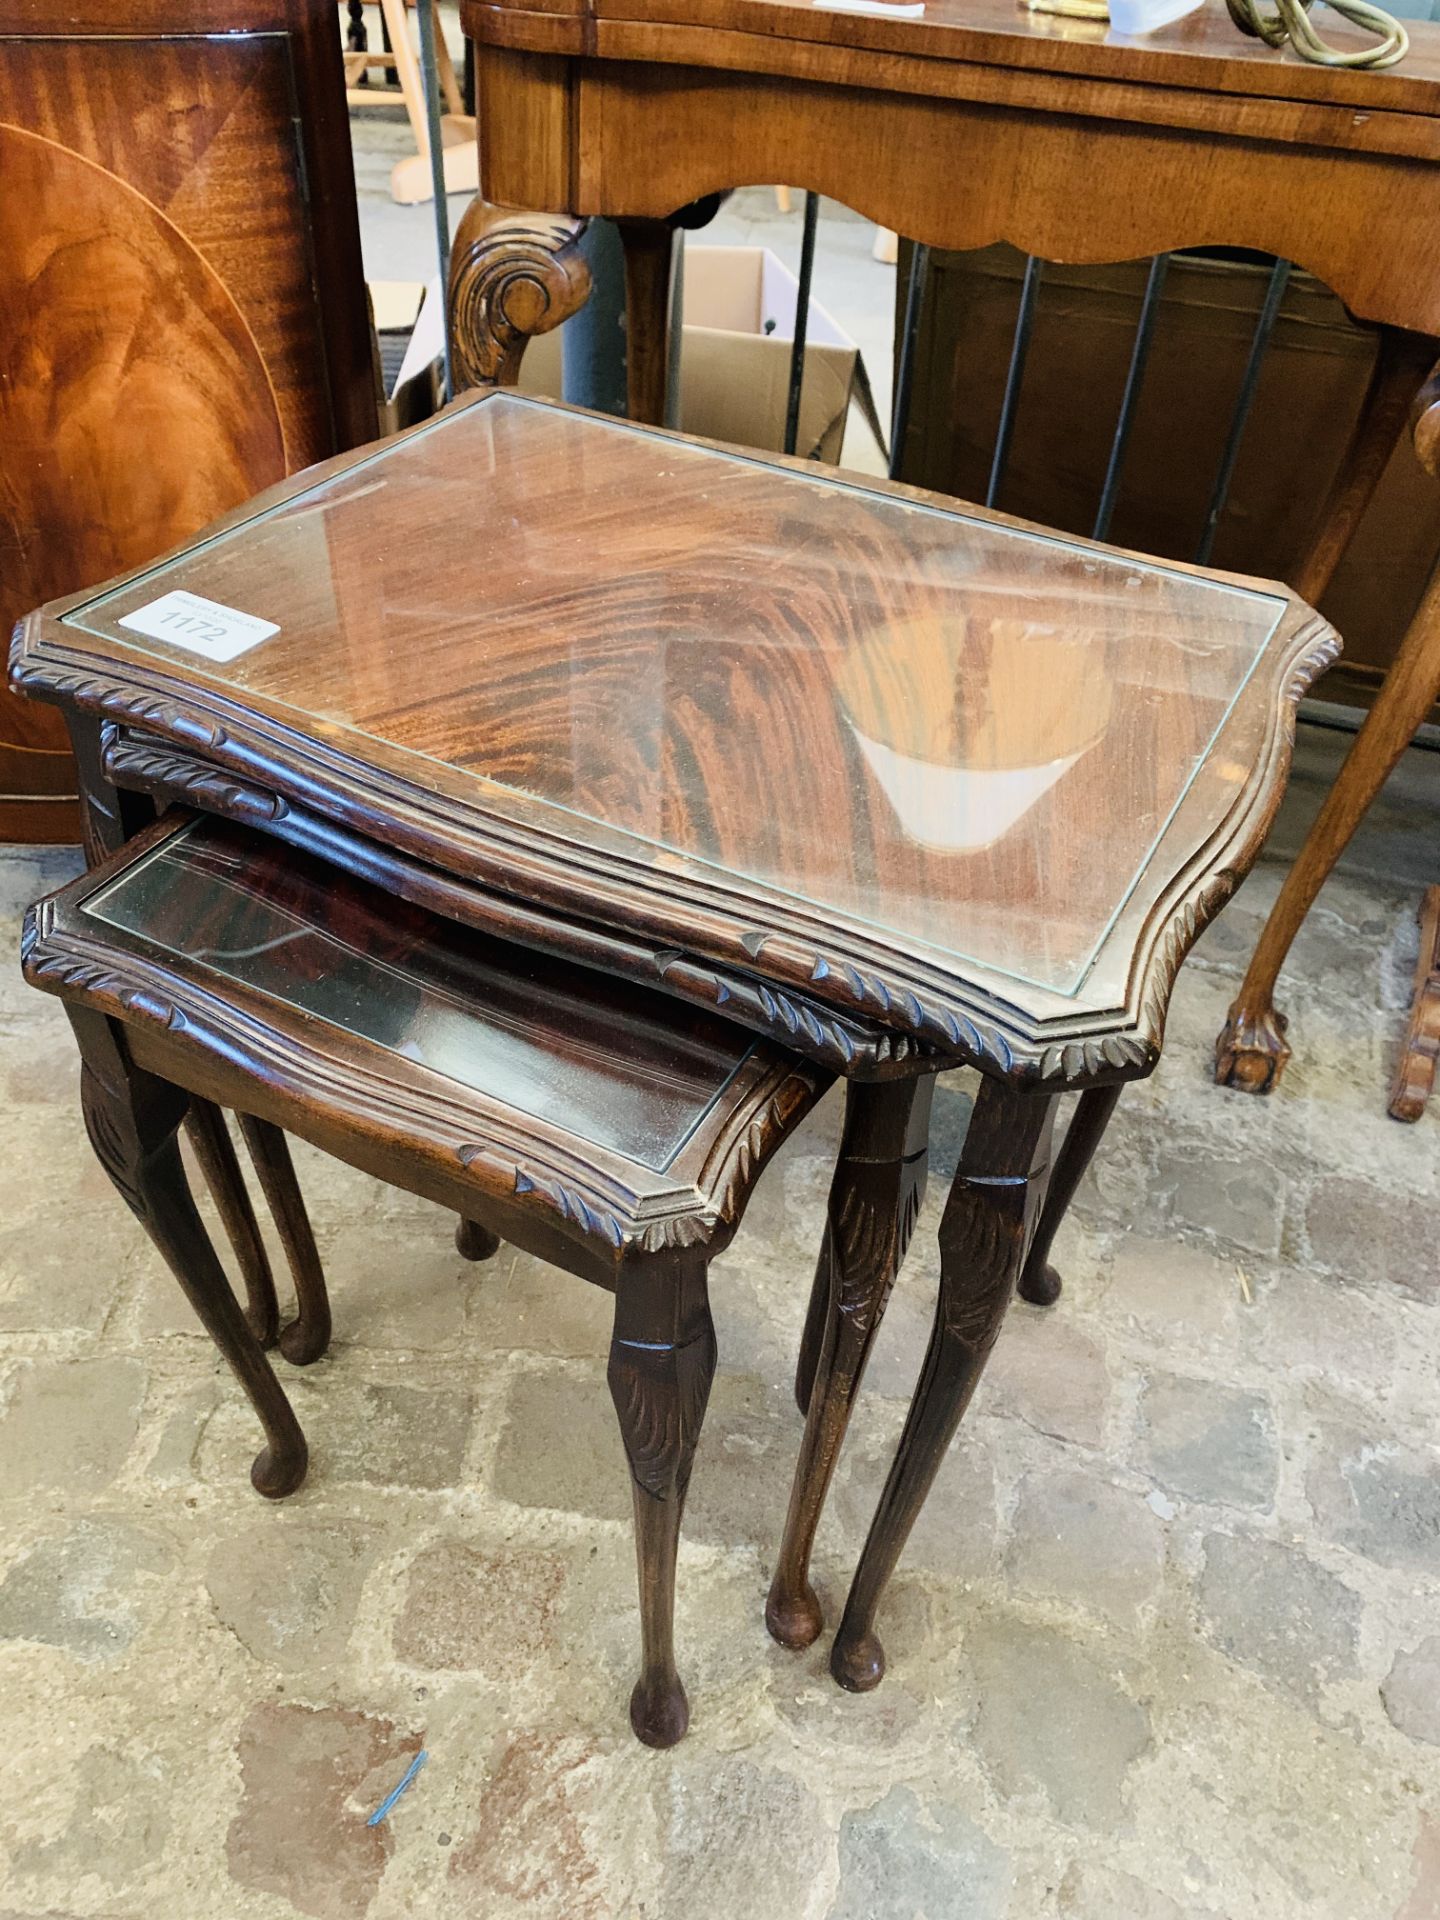 Nest of 3 mahogany tables with glass tops; together with 2 brass table lamps